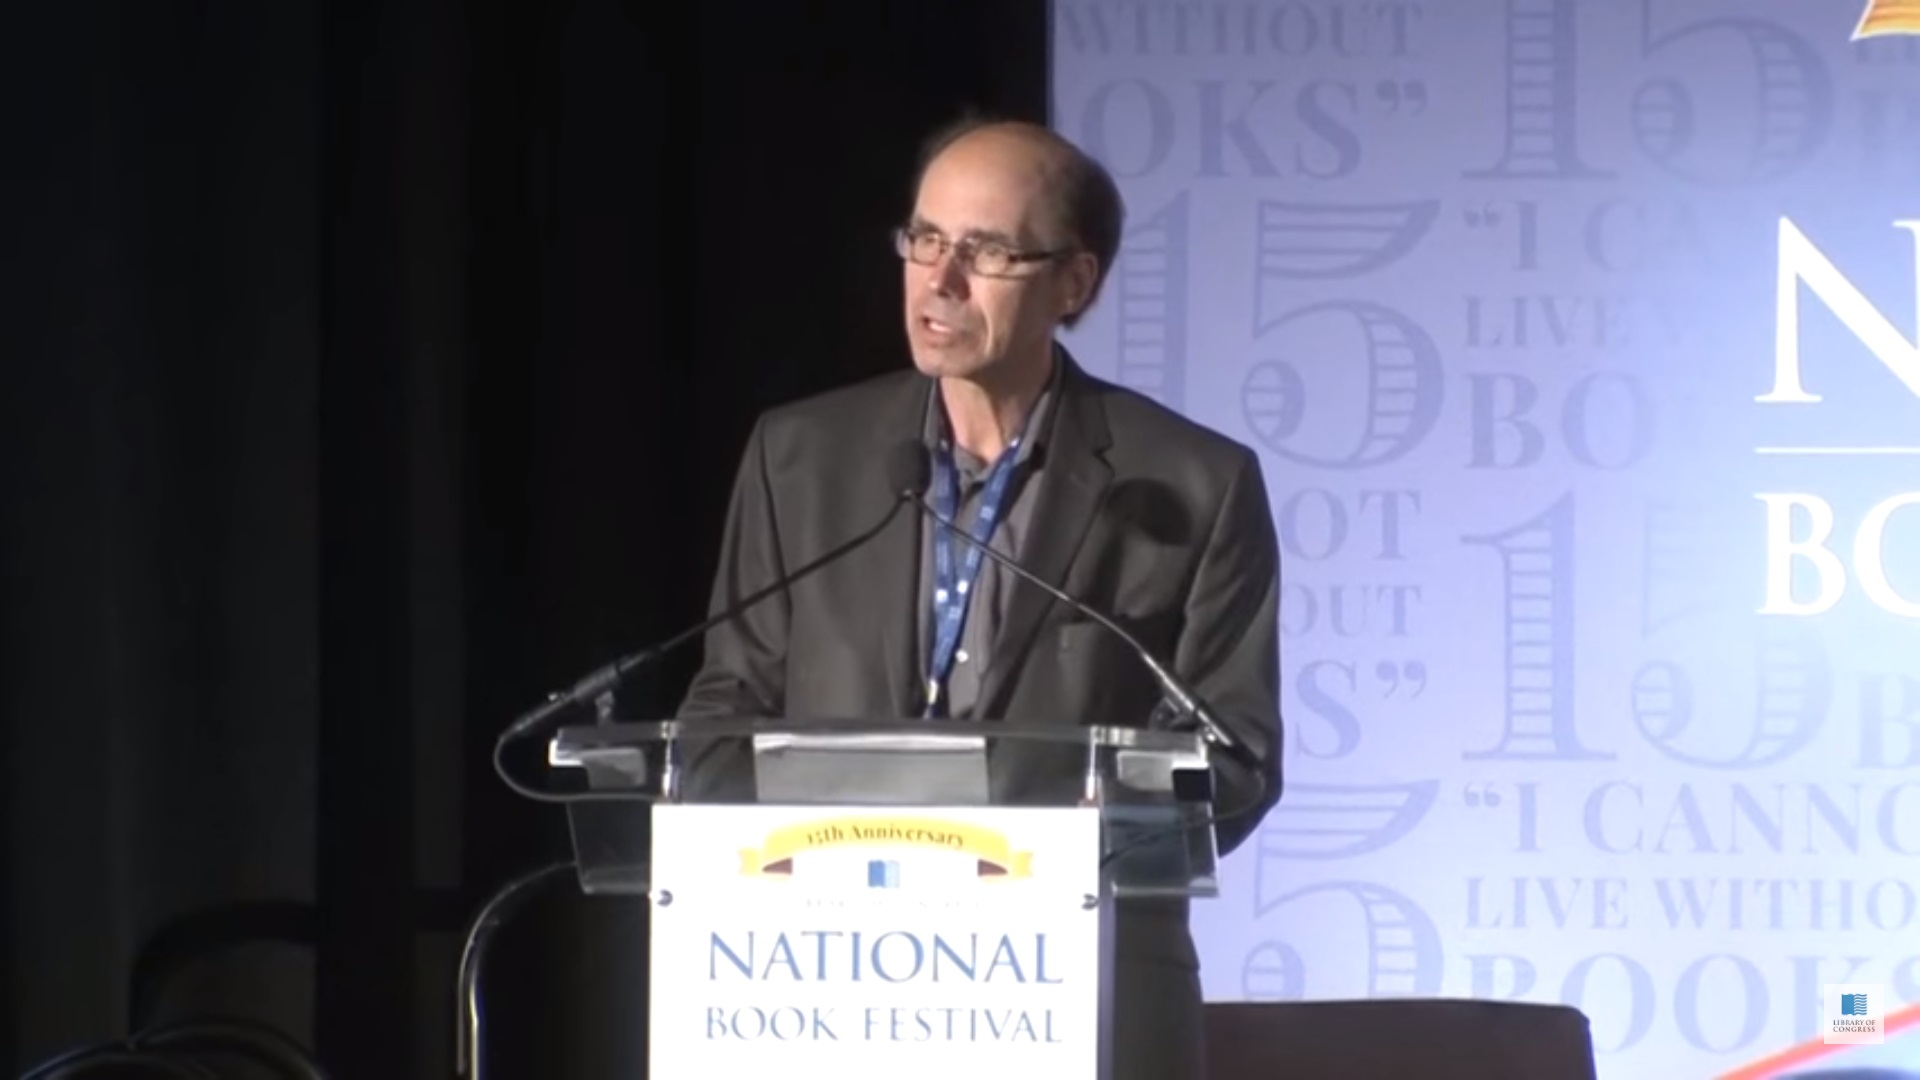 Jeffery Deaver stands behind a podium, talking at an event.